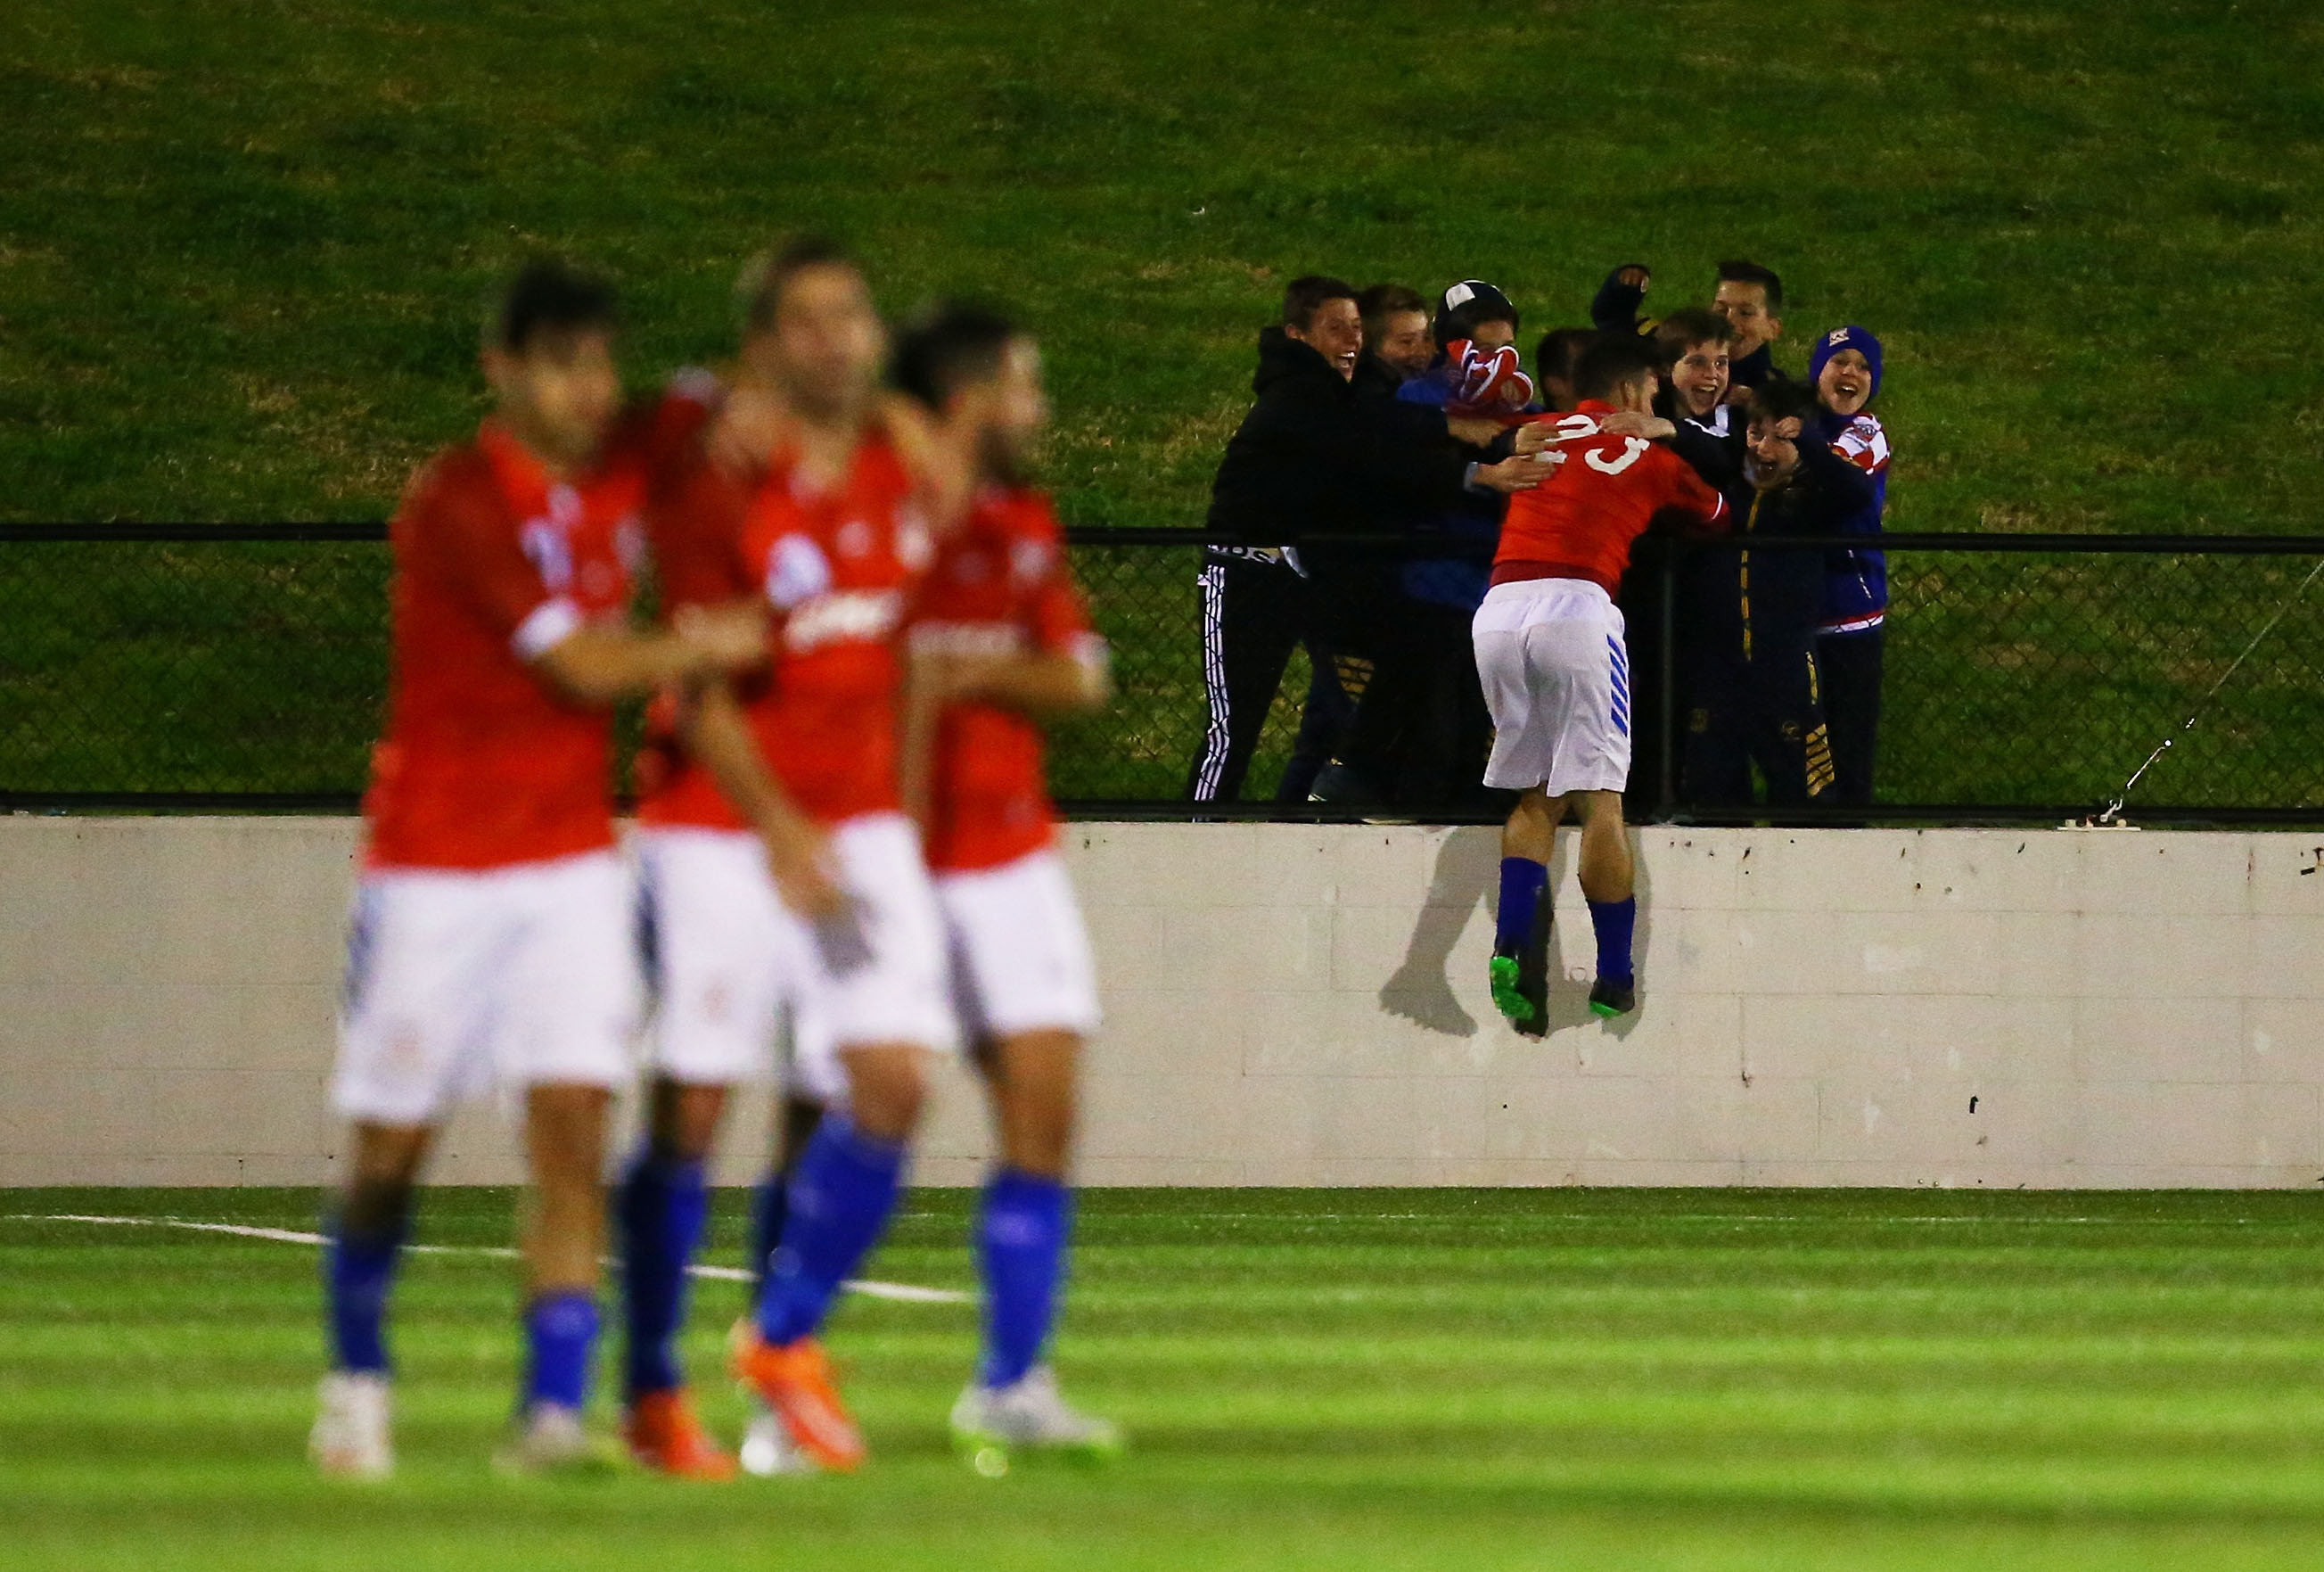 Panagiotis Nikas of Sydney United celebrates with young fans after scoring their second goal.